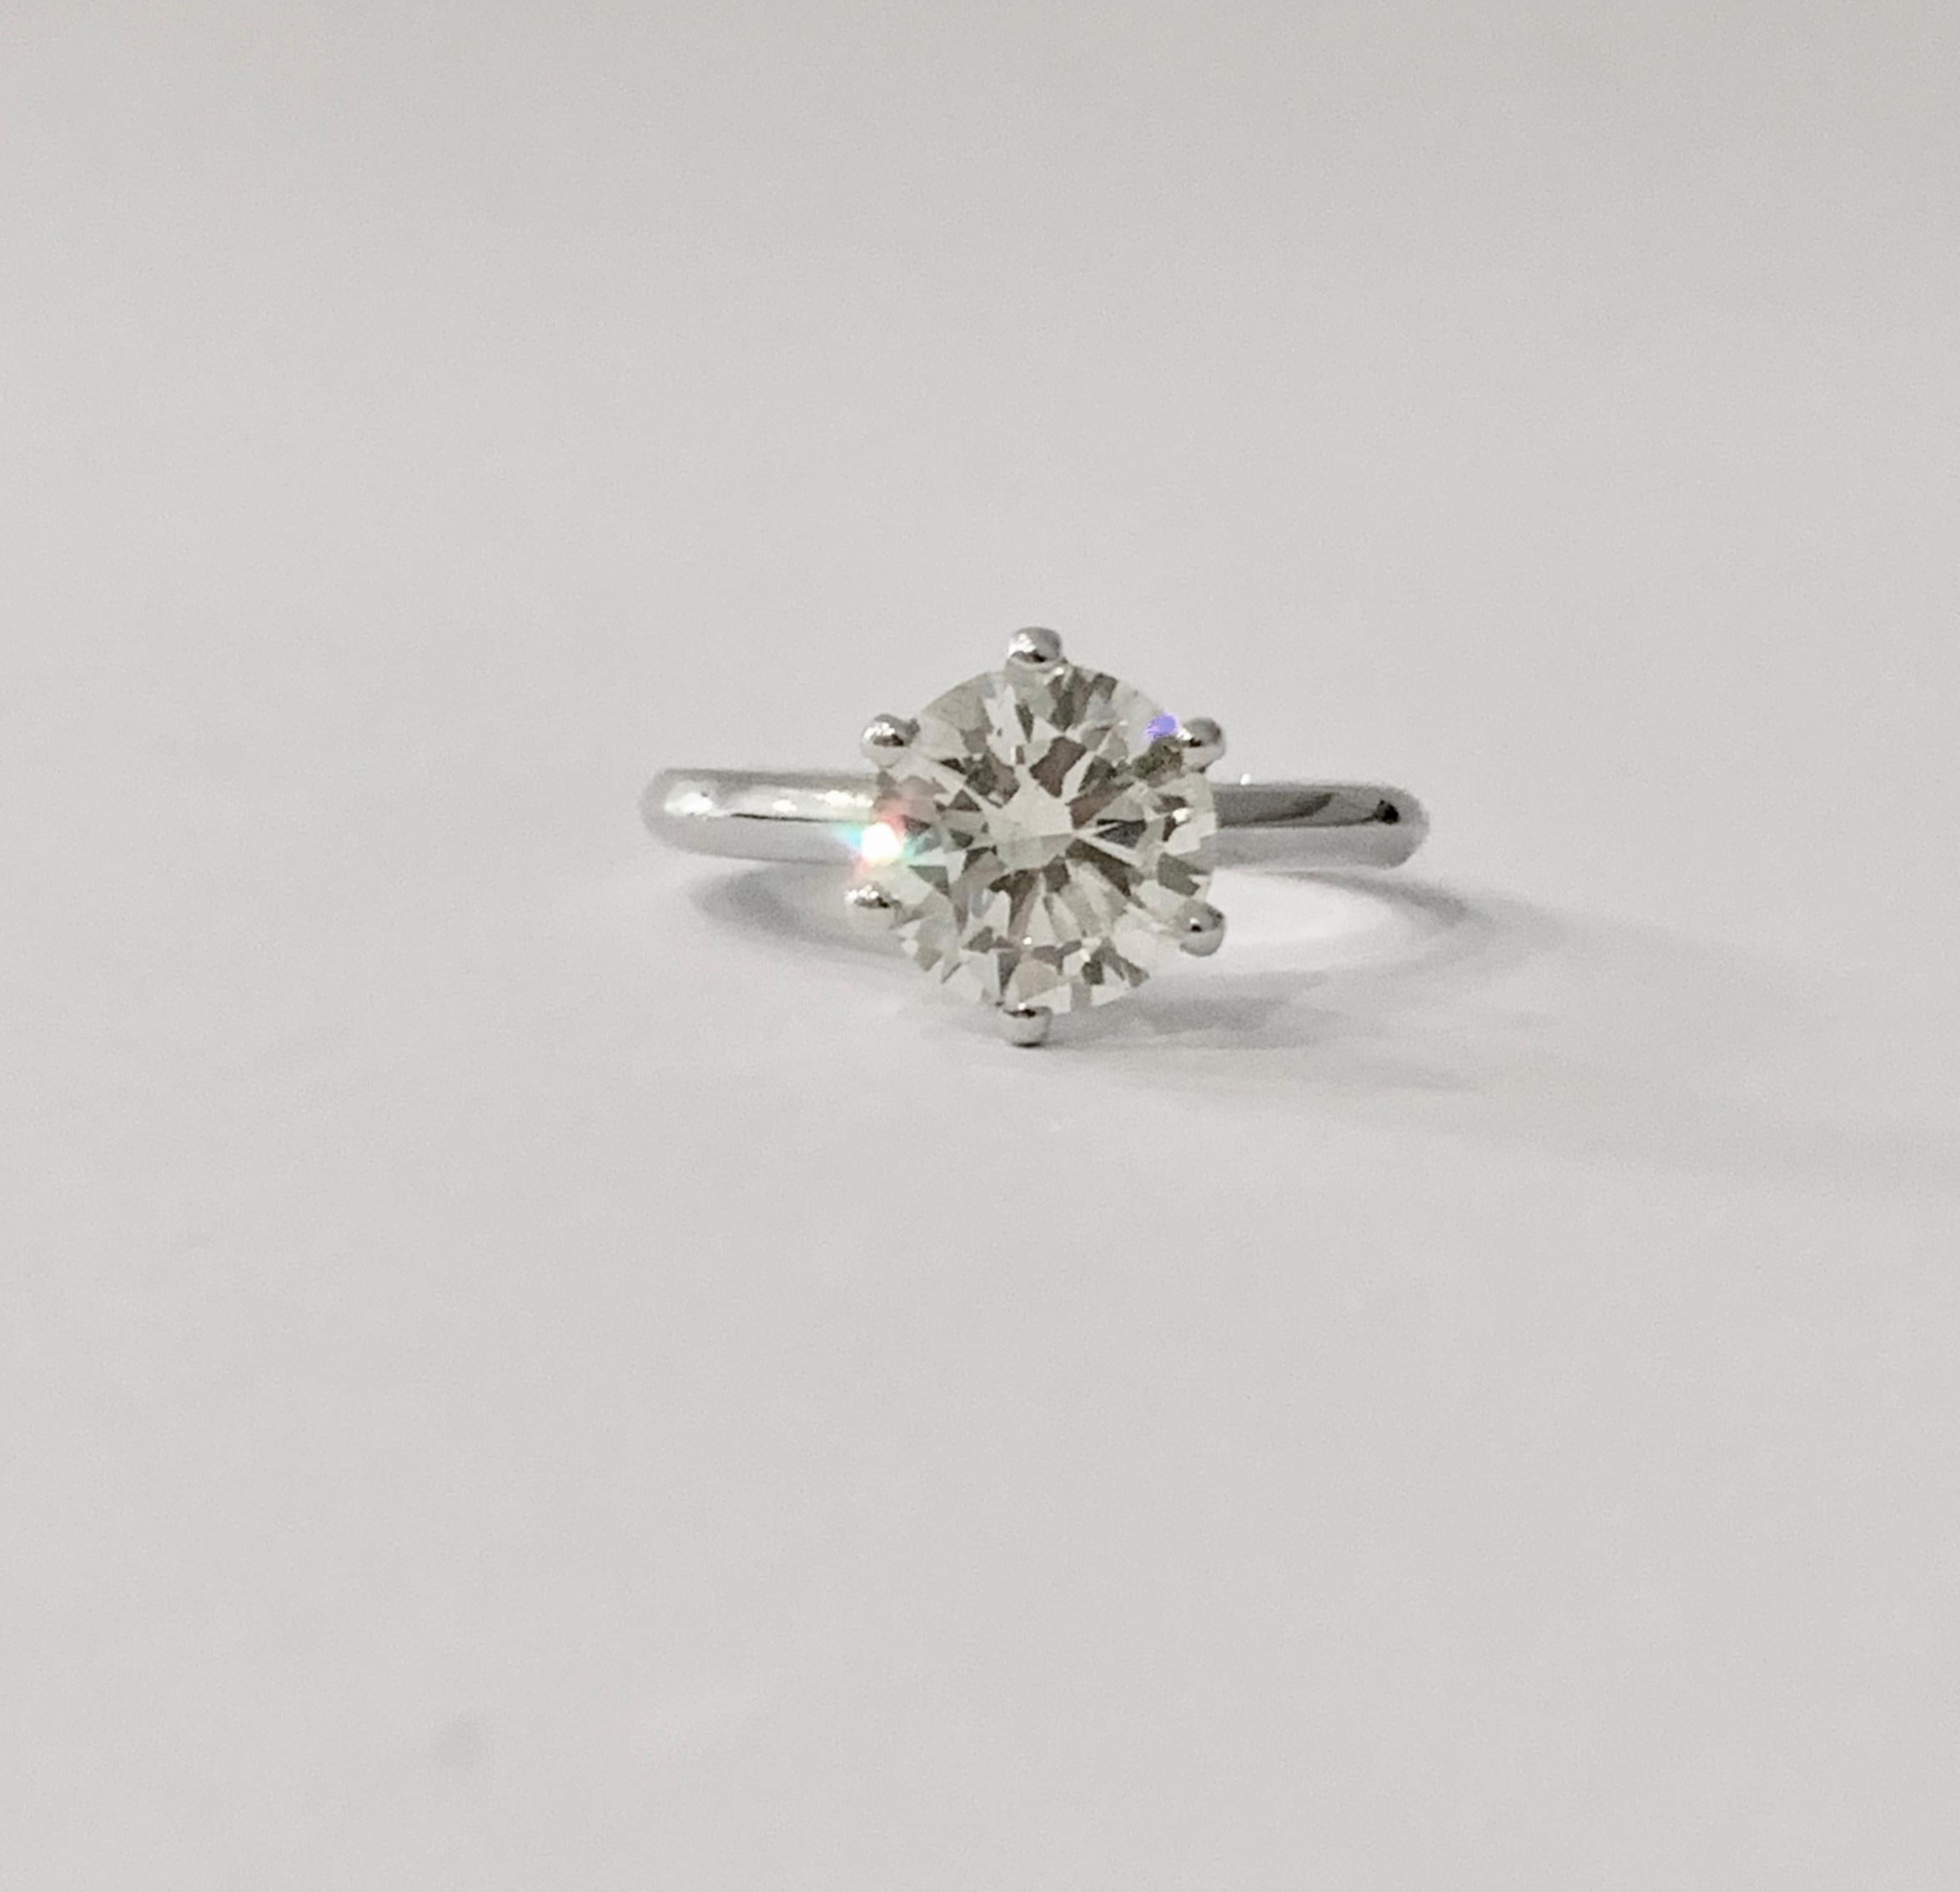 Certified 2.08 Carat Round Brilliant Cut Diamond Ring in 18 Carat White Gold In New Condition For Sale In Chislehurst, Kent